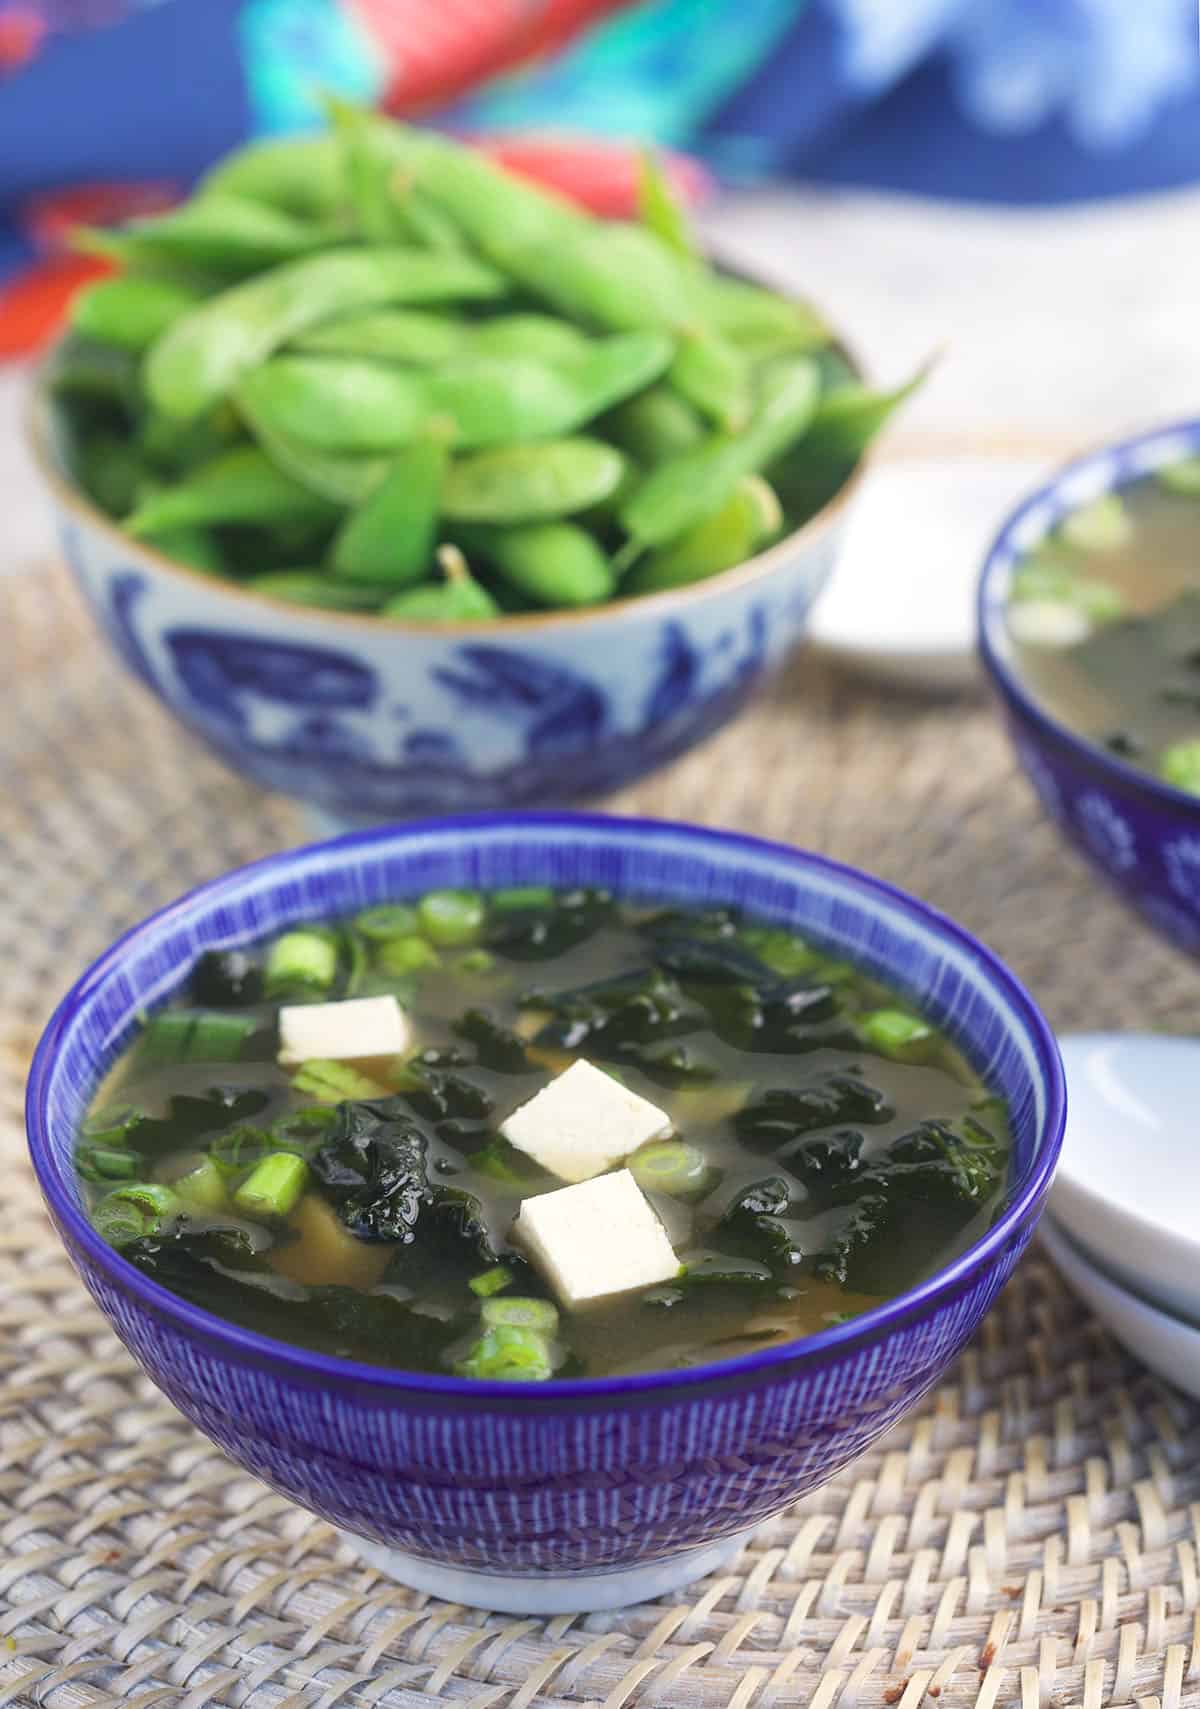 A bowl of edamame is placed next to a bowl of miso soup.